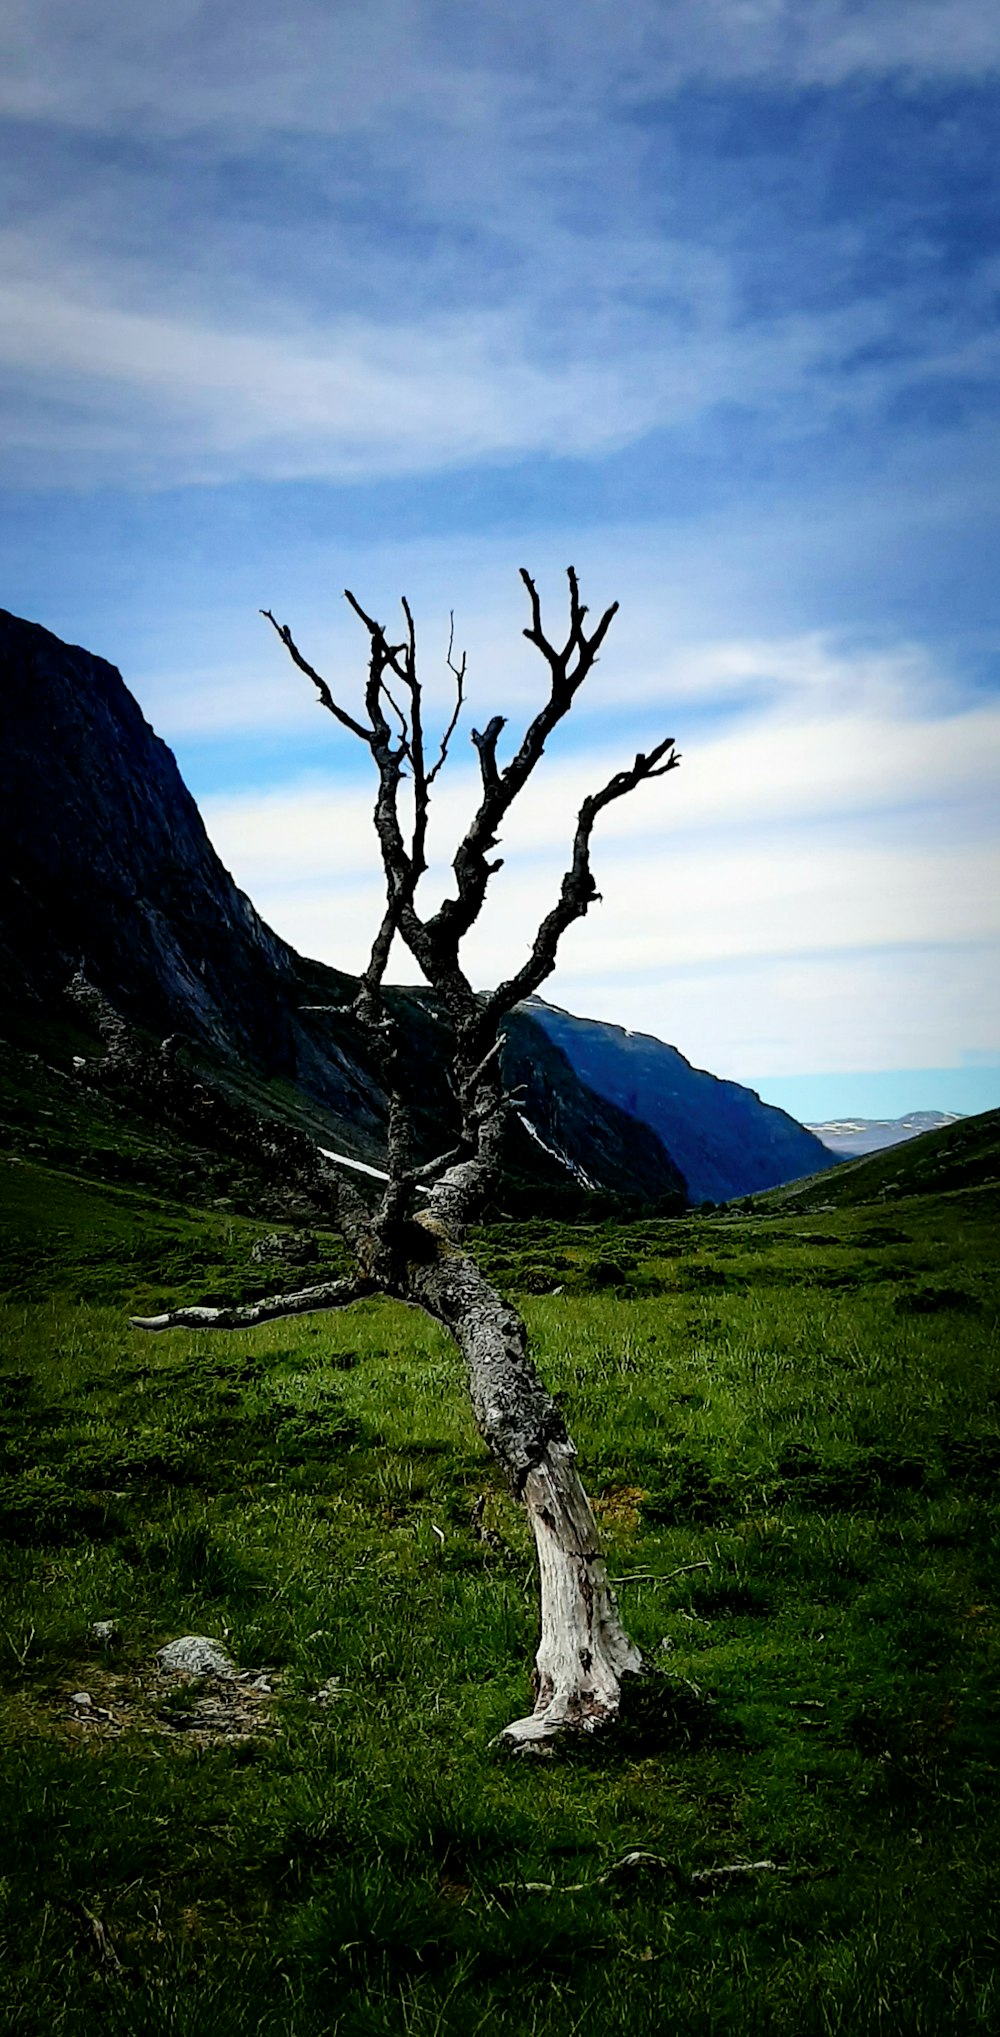 bare tree on green grass field near mountain during daytime